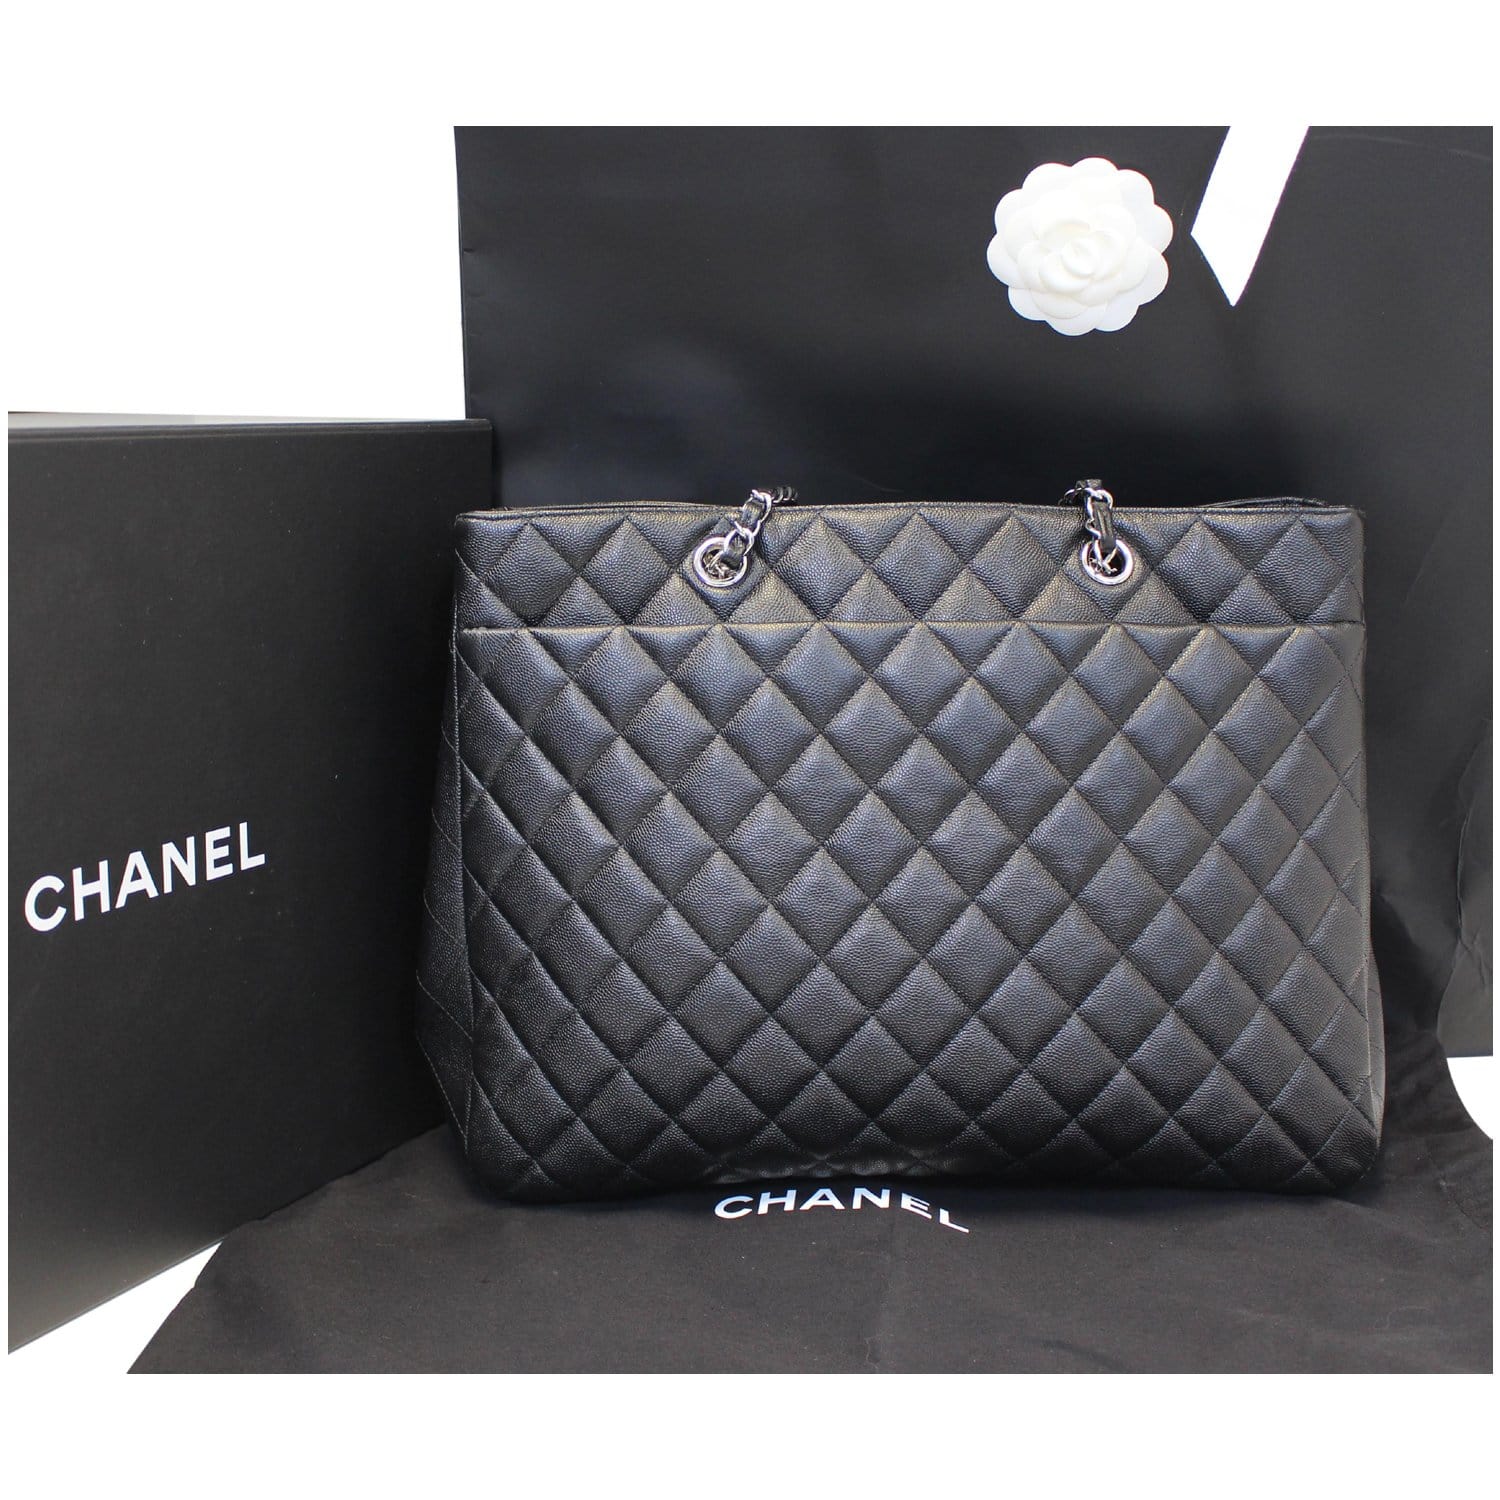 Sold at Auction: CHANEL CAVIAR COCO CABAS XI BLACK LEATHER TOTE BAG